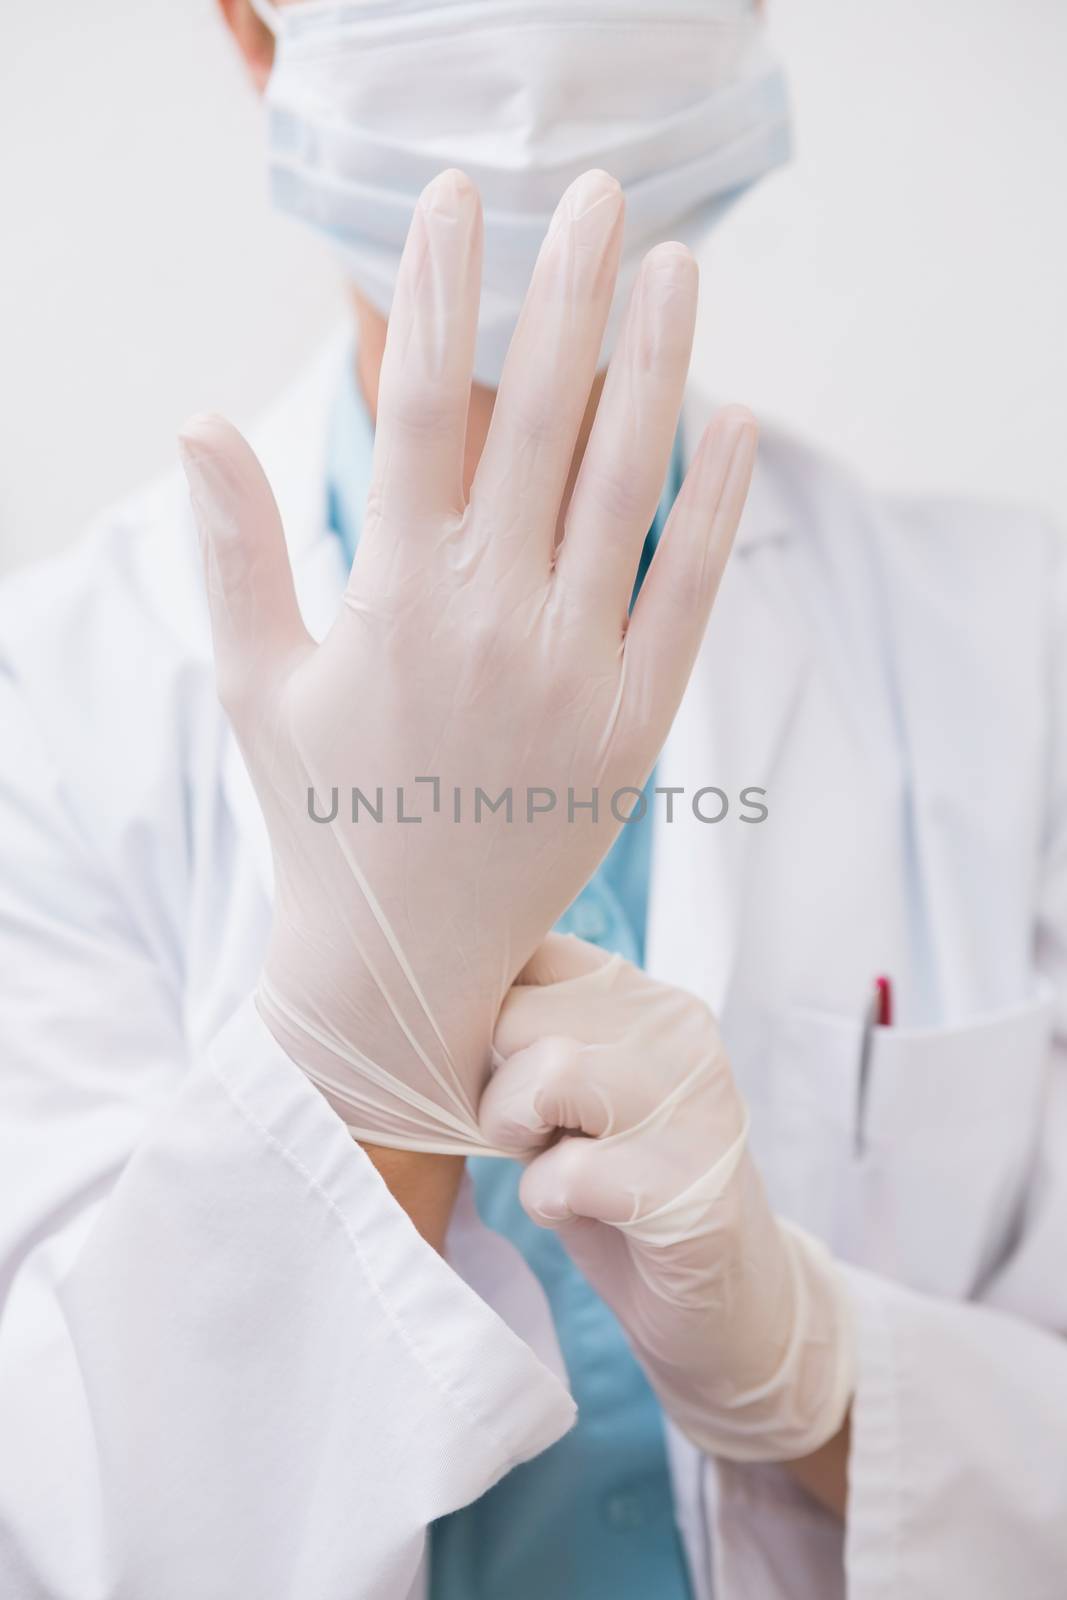 Dentist pulling on surgical gloves by Wavebreakmedia